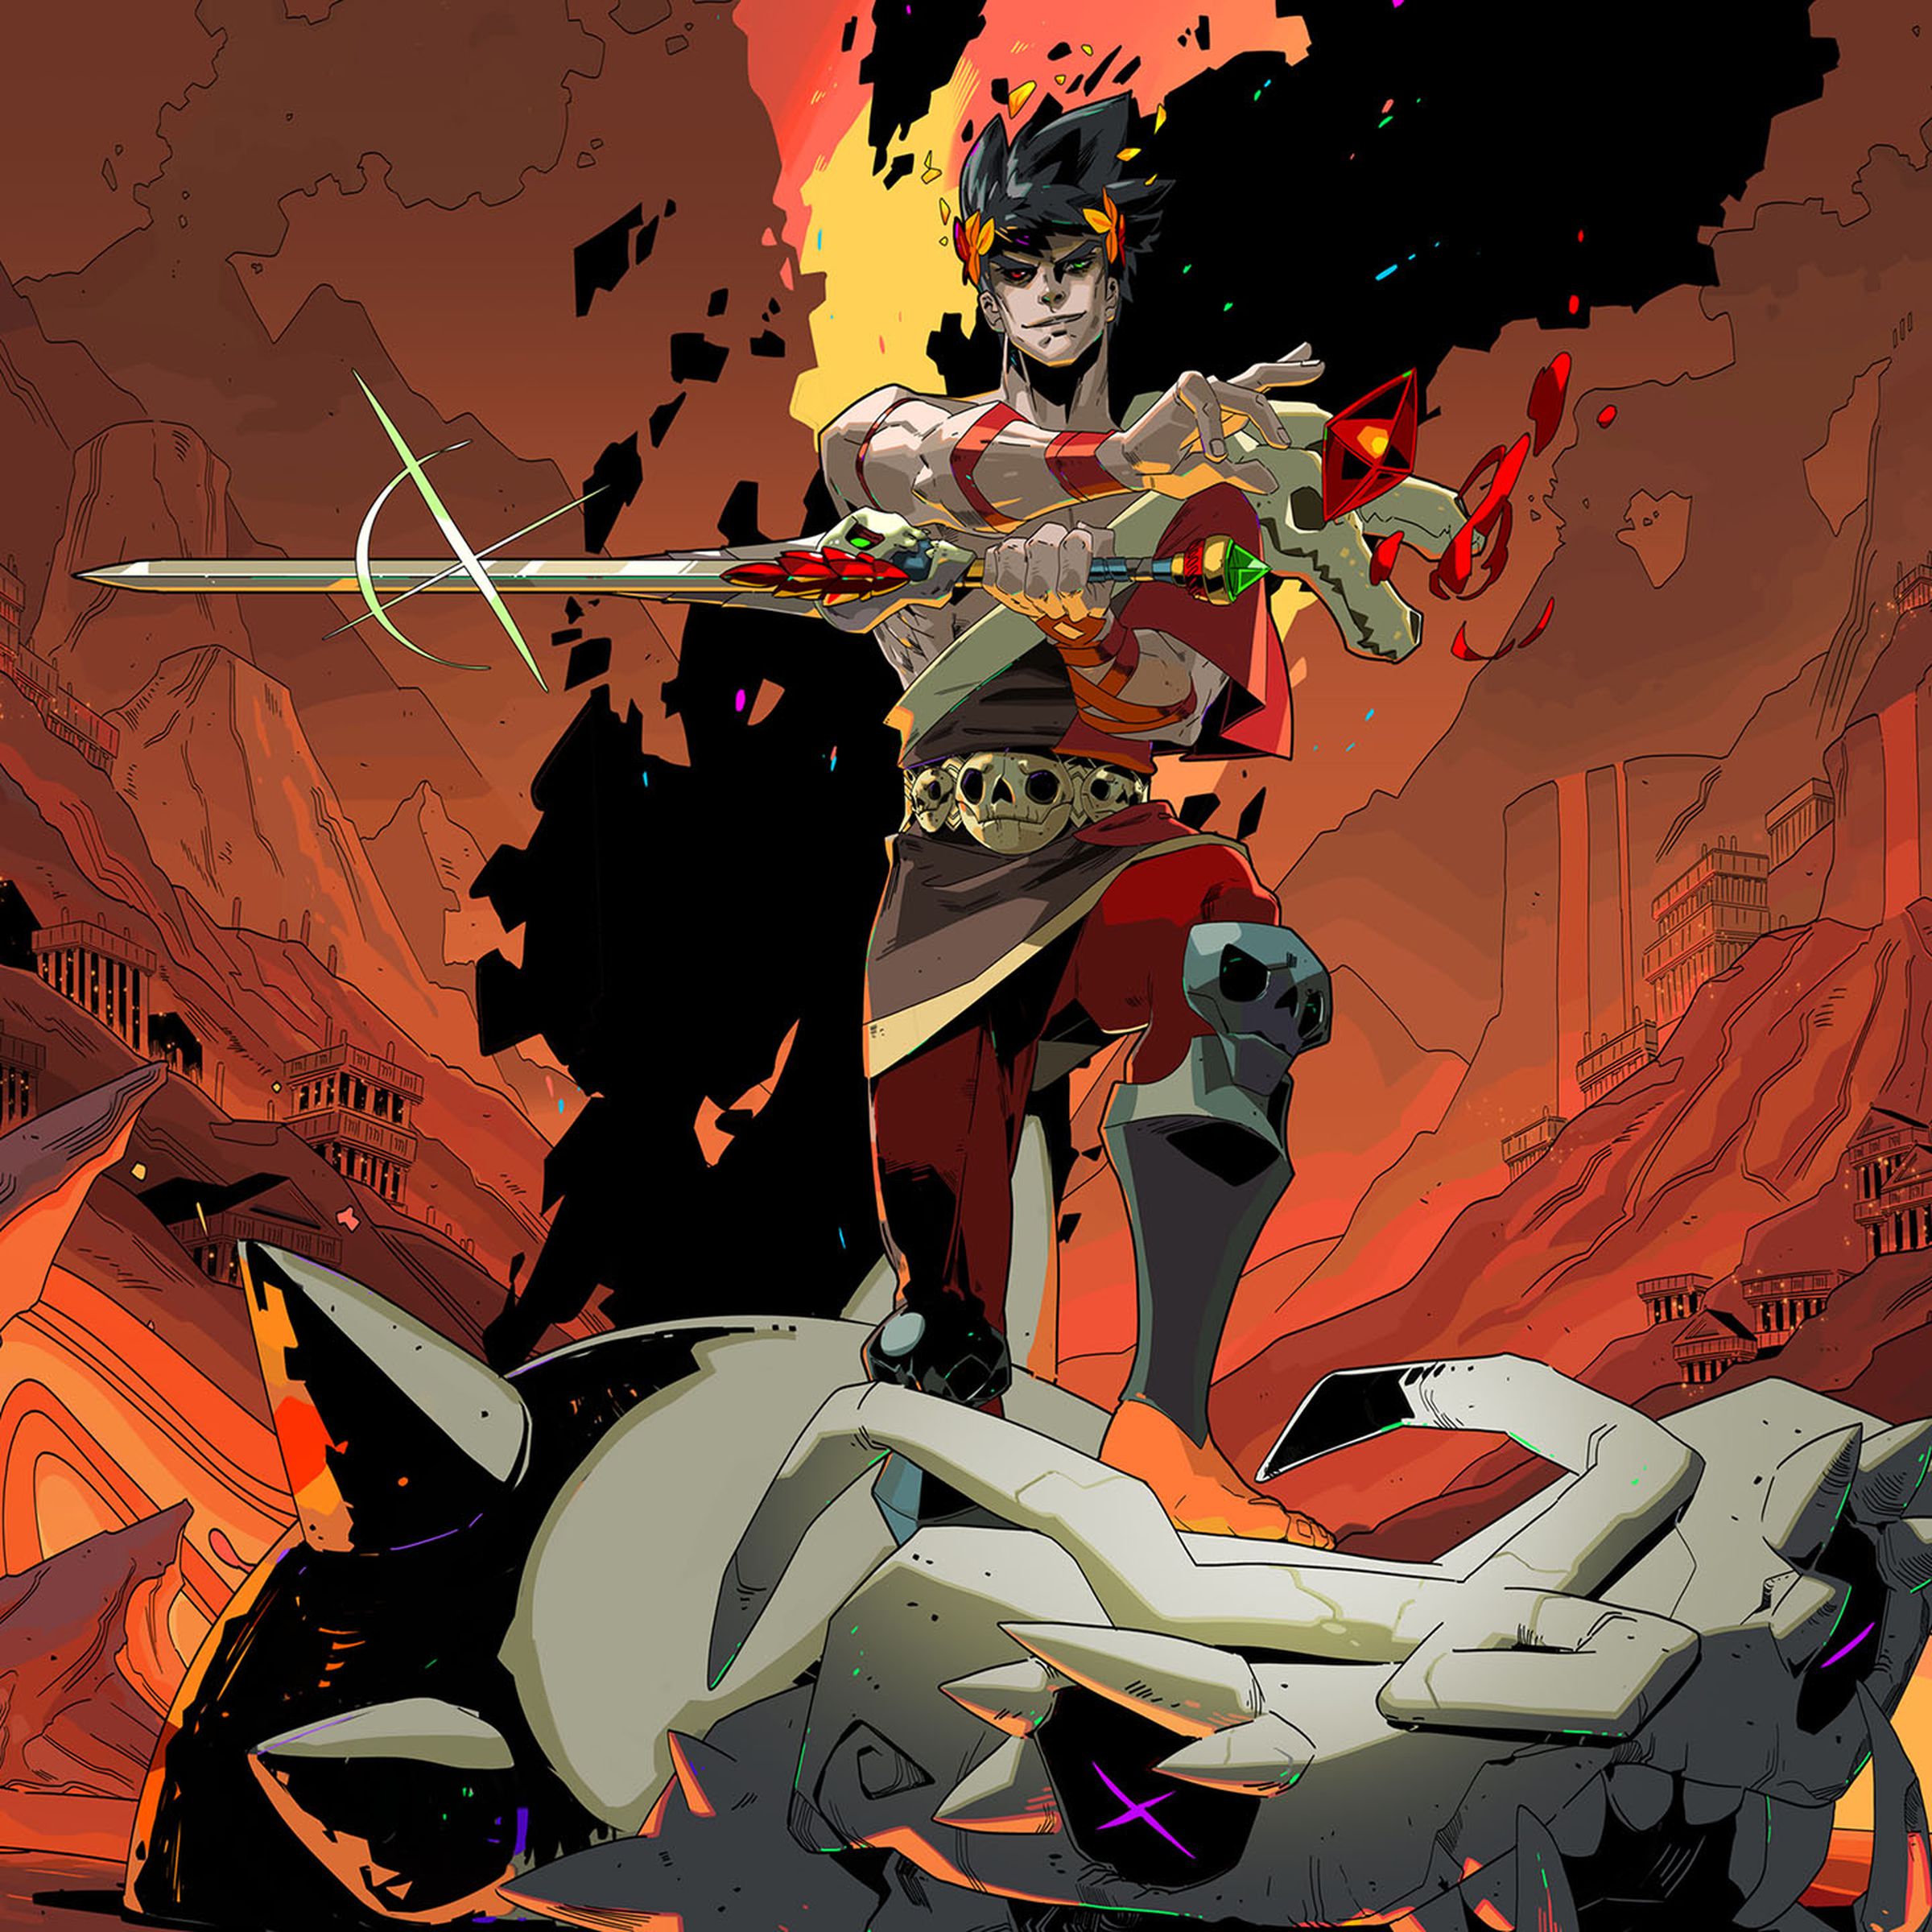 Key art for Hades featuring the Prince Zagreus standing on a hydra skull against a hellish background